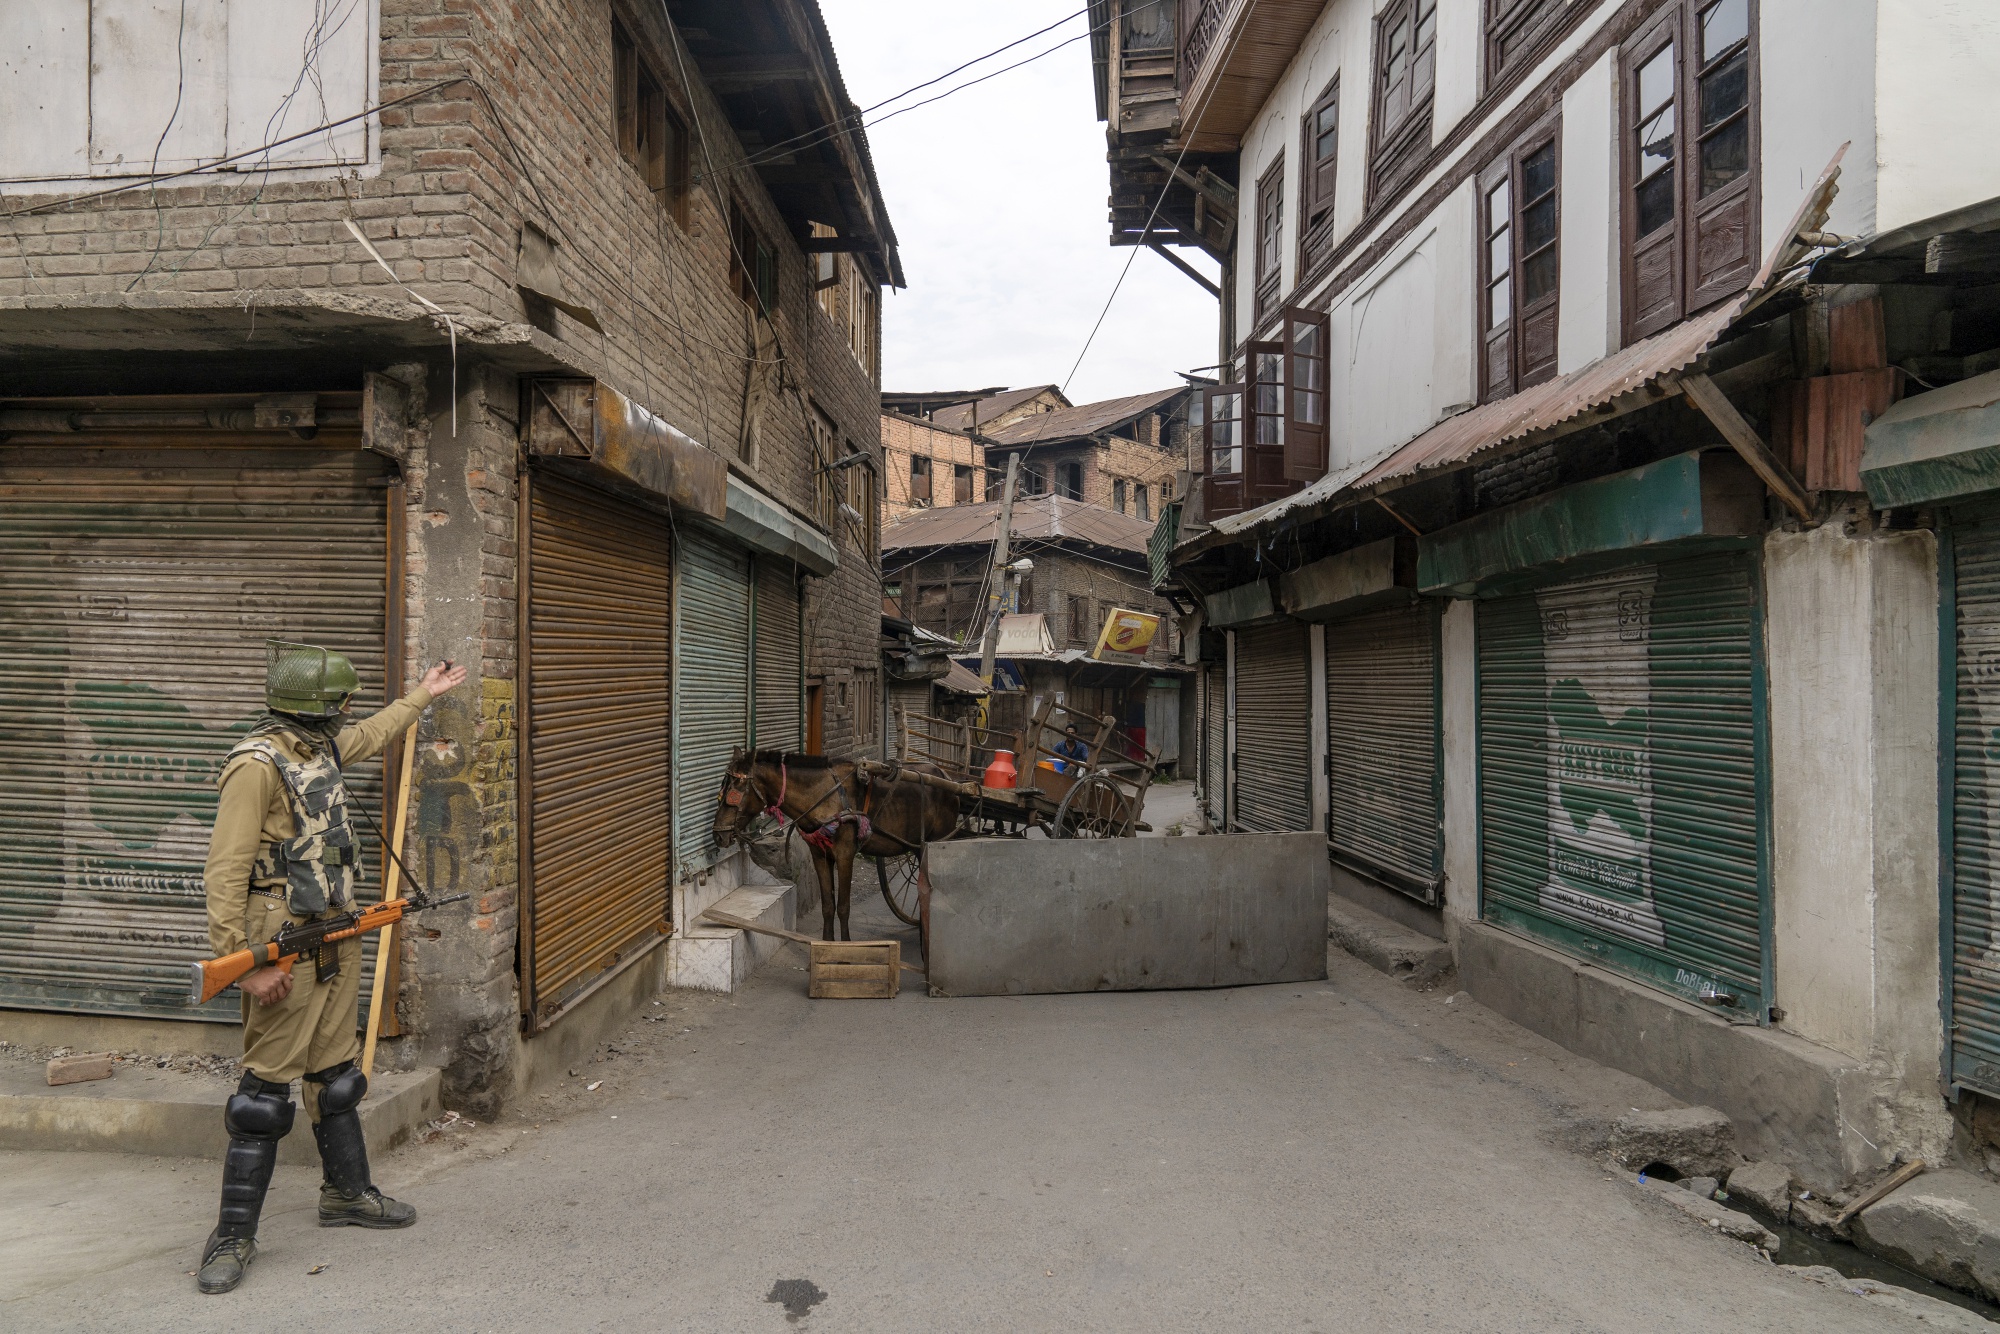 In Kashmir Shops Are Closed And All Is Silent, But It’s Far From Peaceful